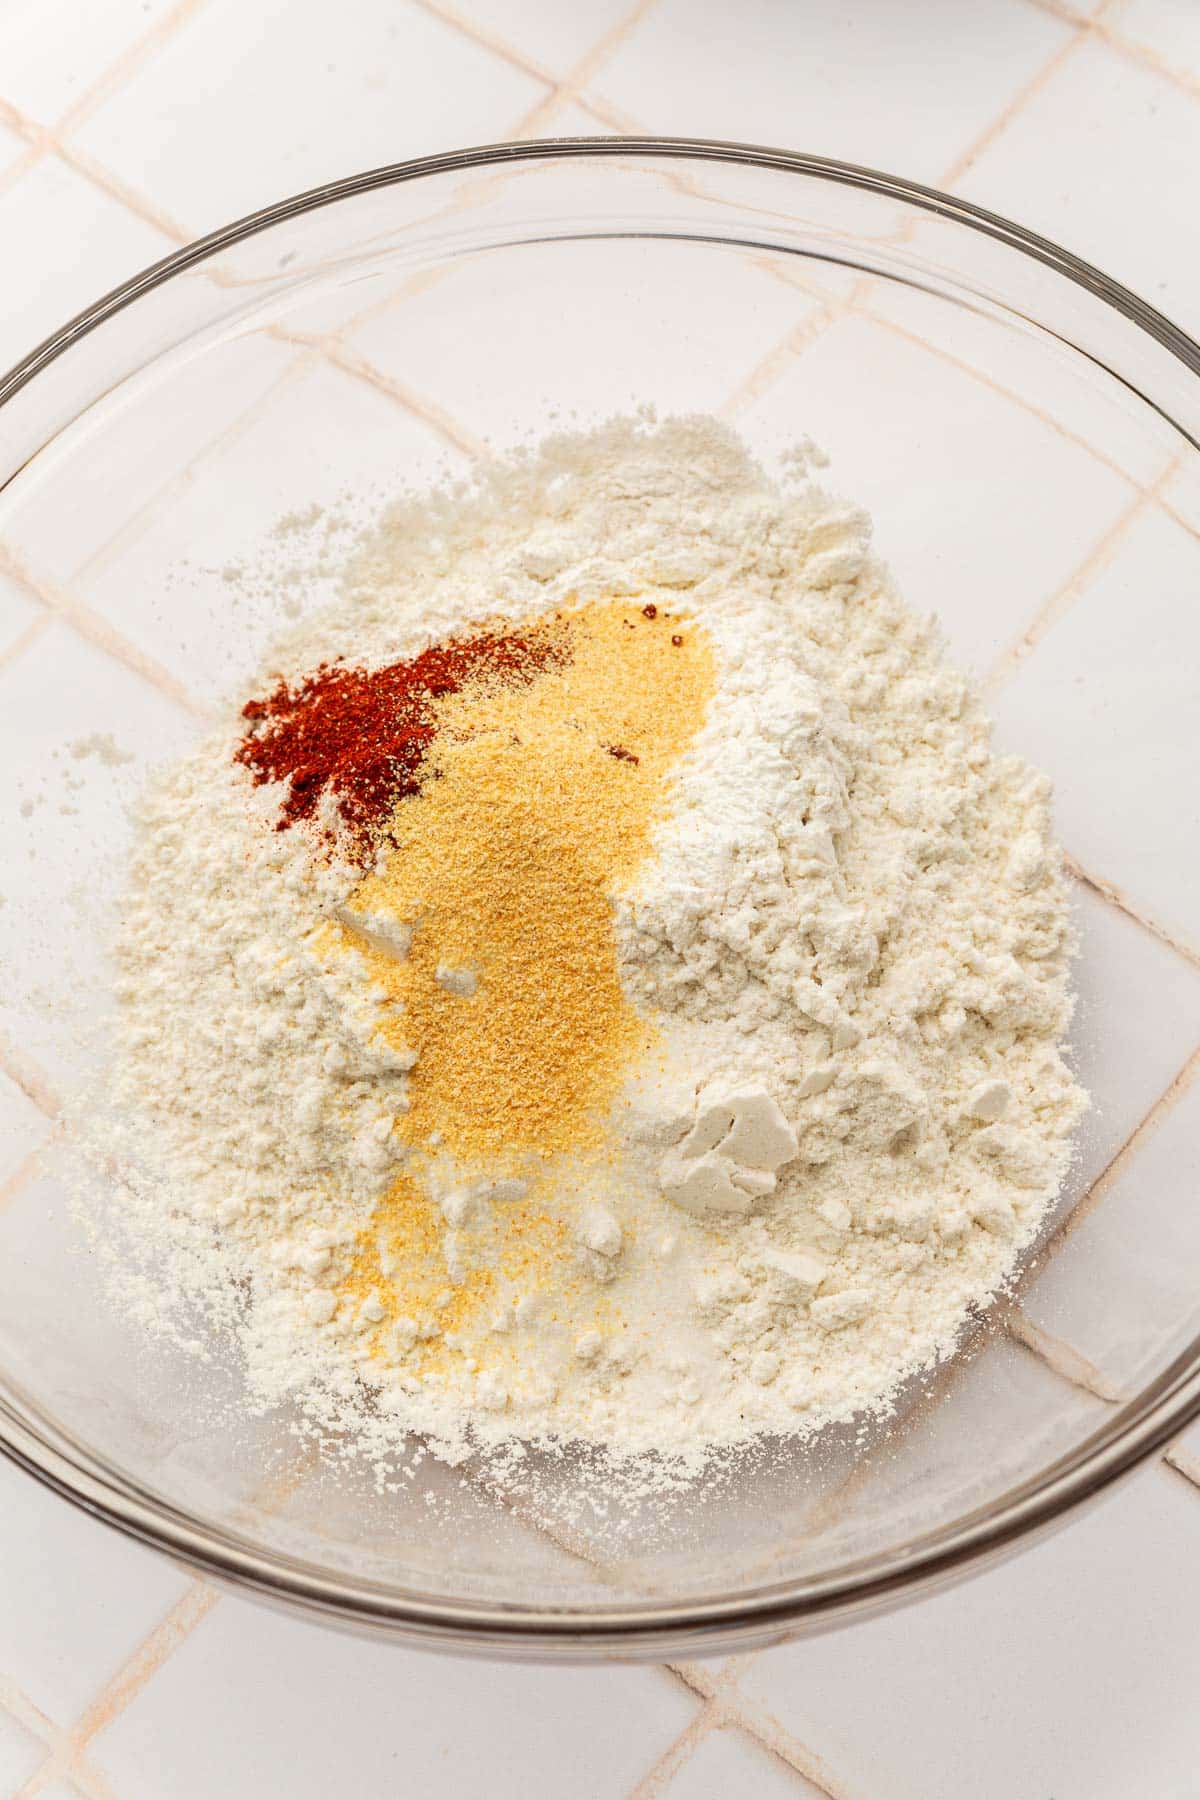 A glass mixing bowl with gluten-free flour blend, garlic powder, paprika and salt before mixing together.